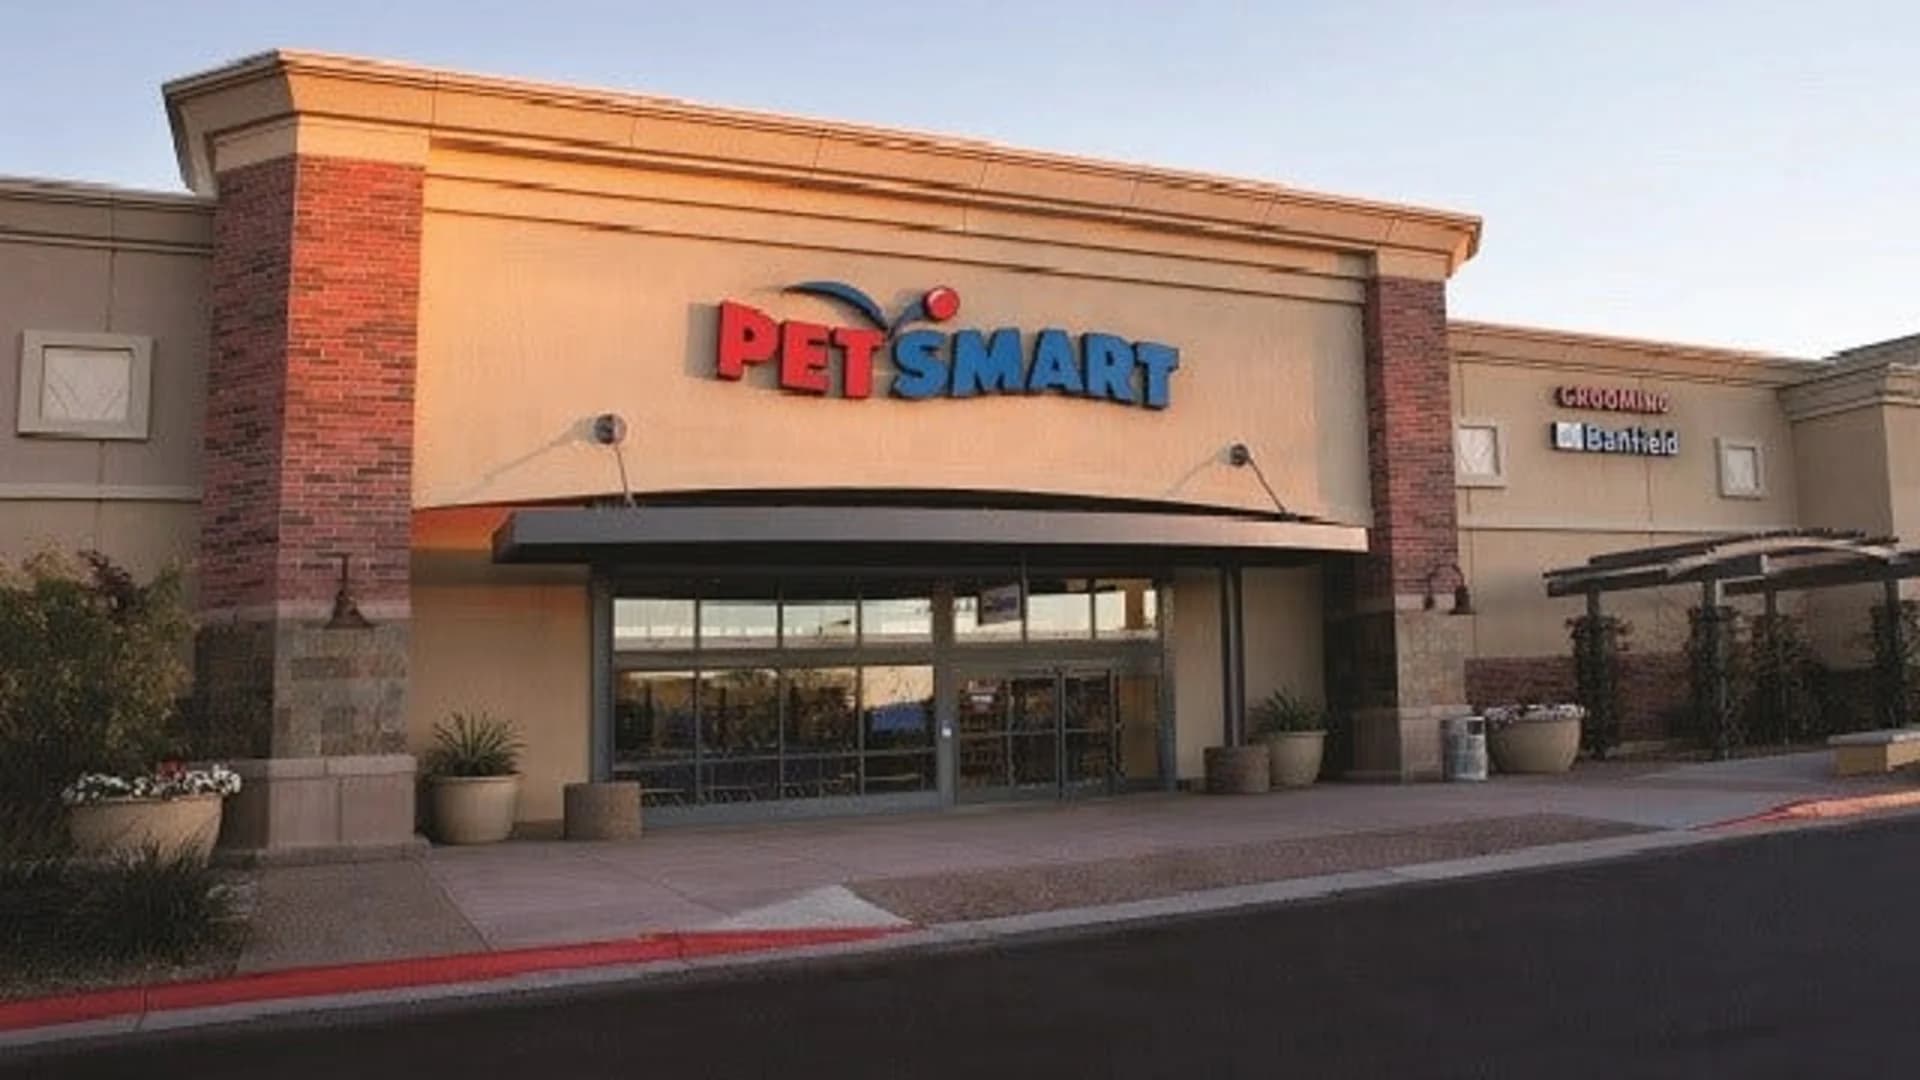 Report: Owners say their dogs died after grooming at NJ PetSmart